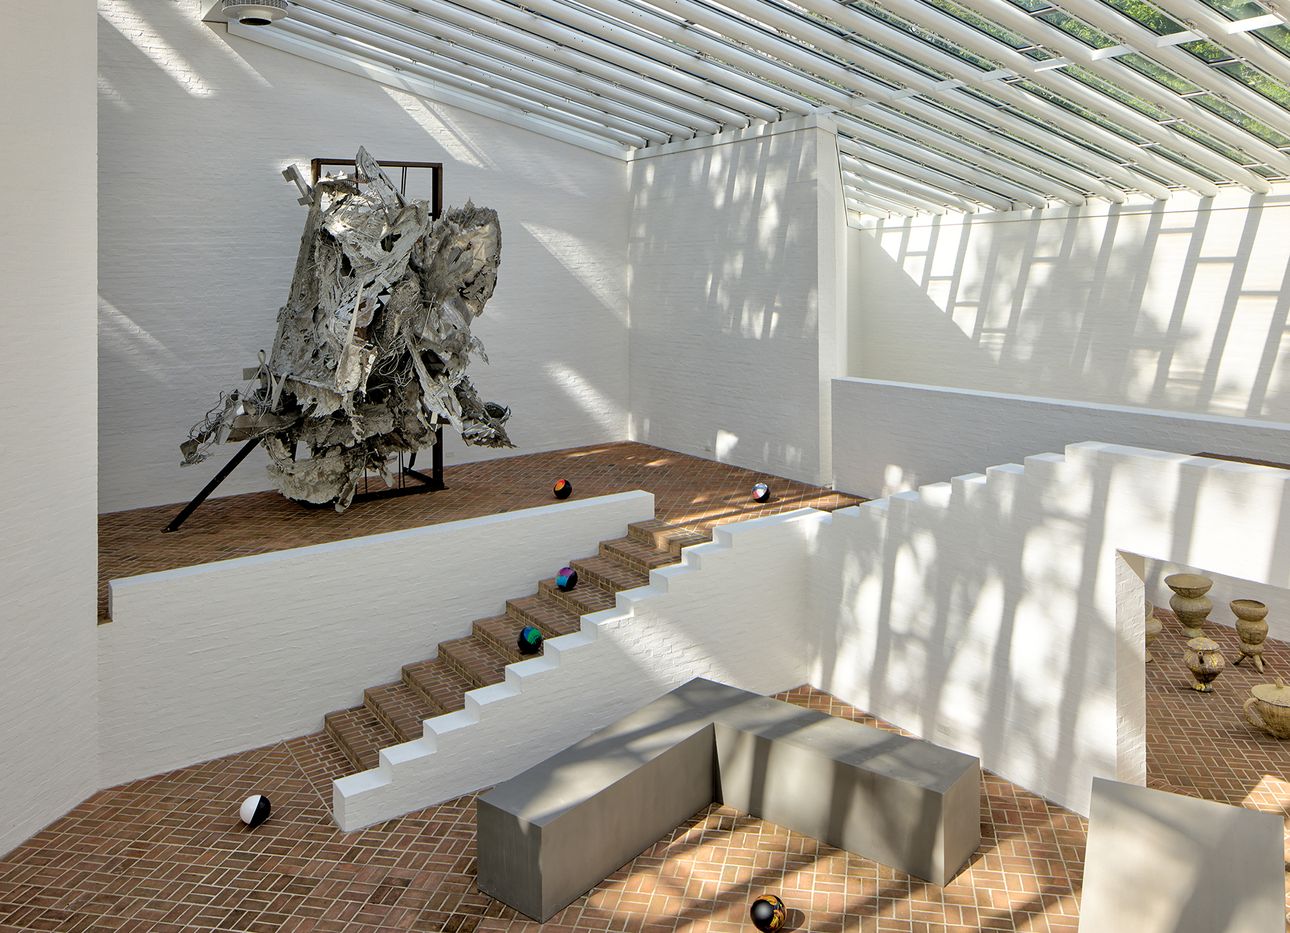 The Sculpture Gallery at The Glass House. (Photo: Michael Biondo)